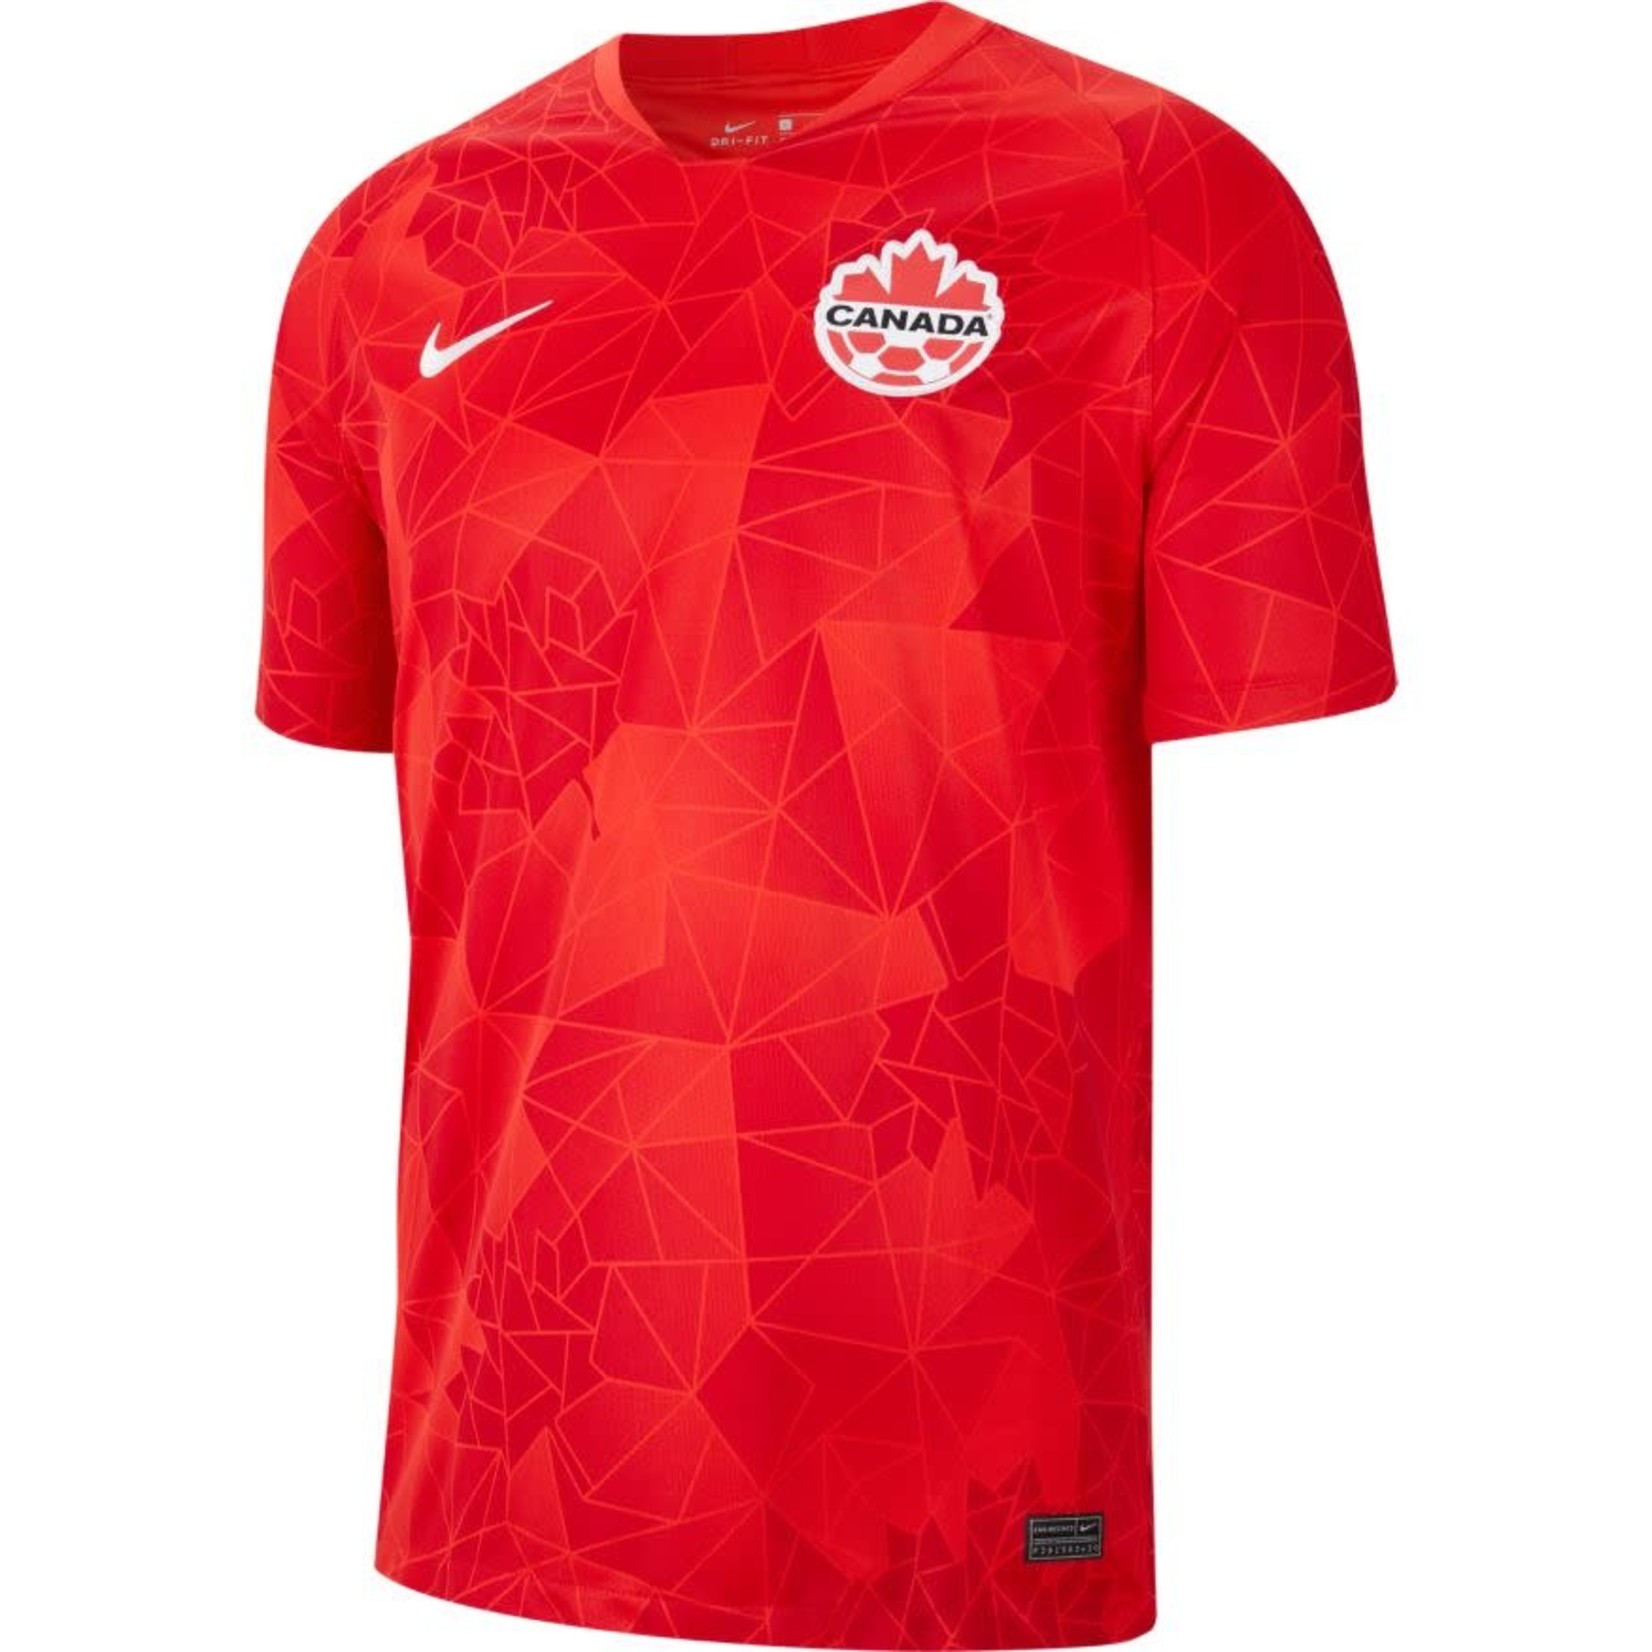 Nike Canada 20/21 Home Jersey Adult